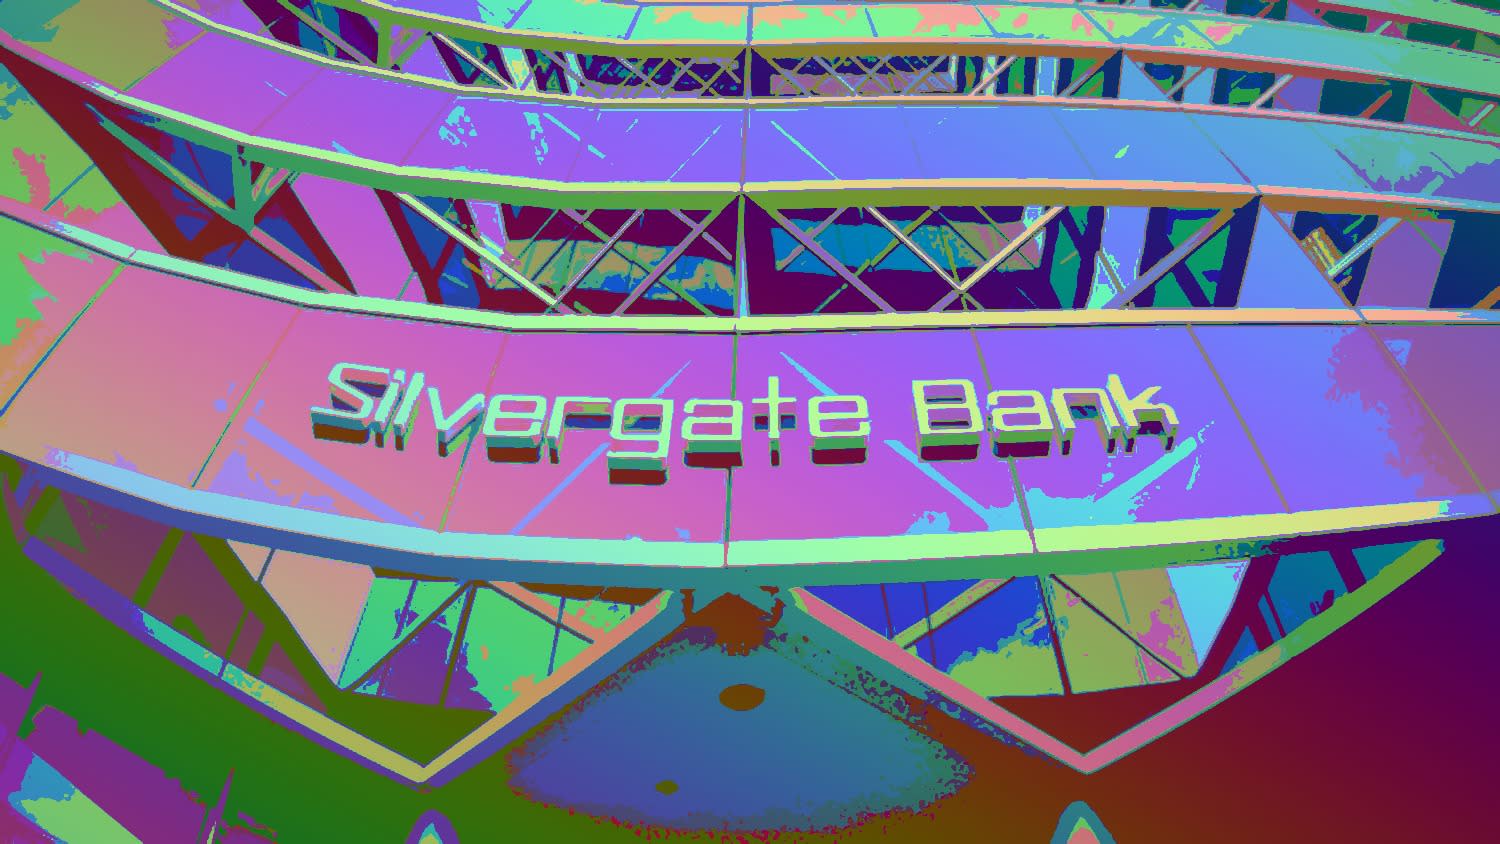 Silvergate Bank, one of the few financial institutions serving cryptocurrency firms, will stop processing U.S. dollar deposits and withdrawals for exc